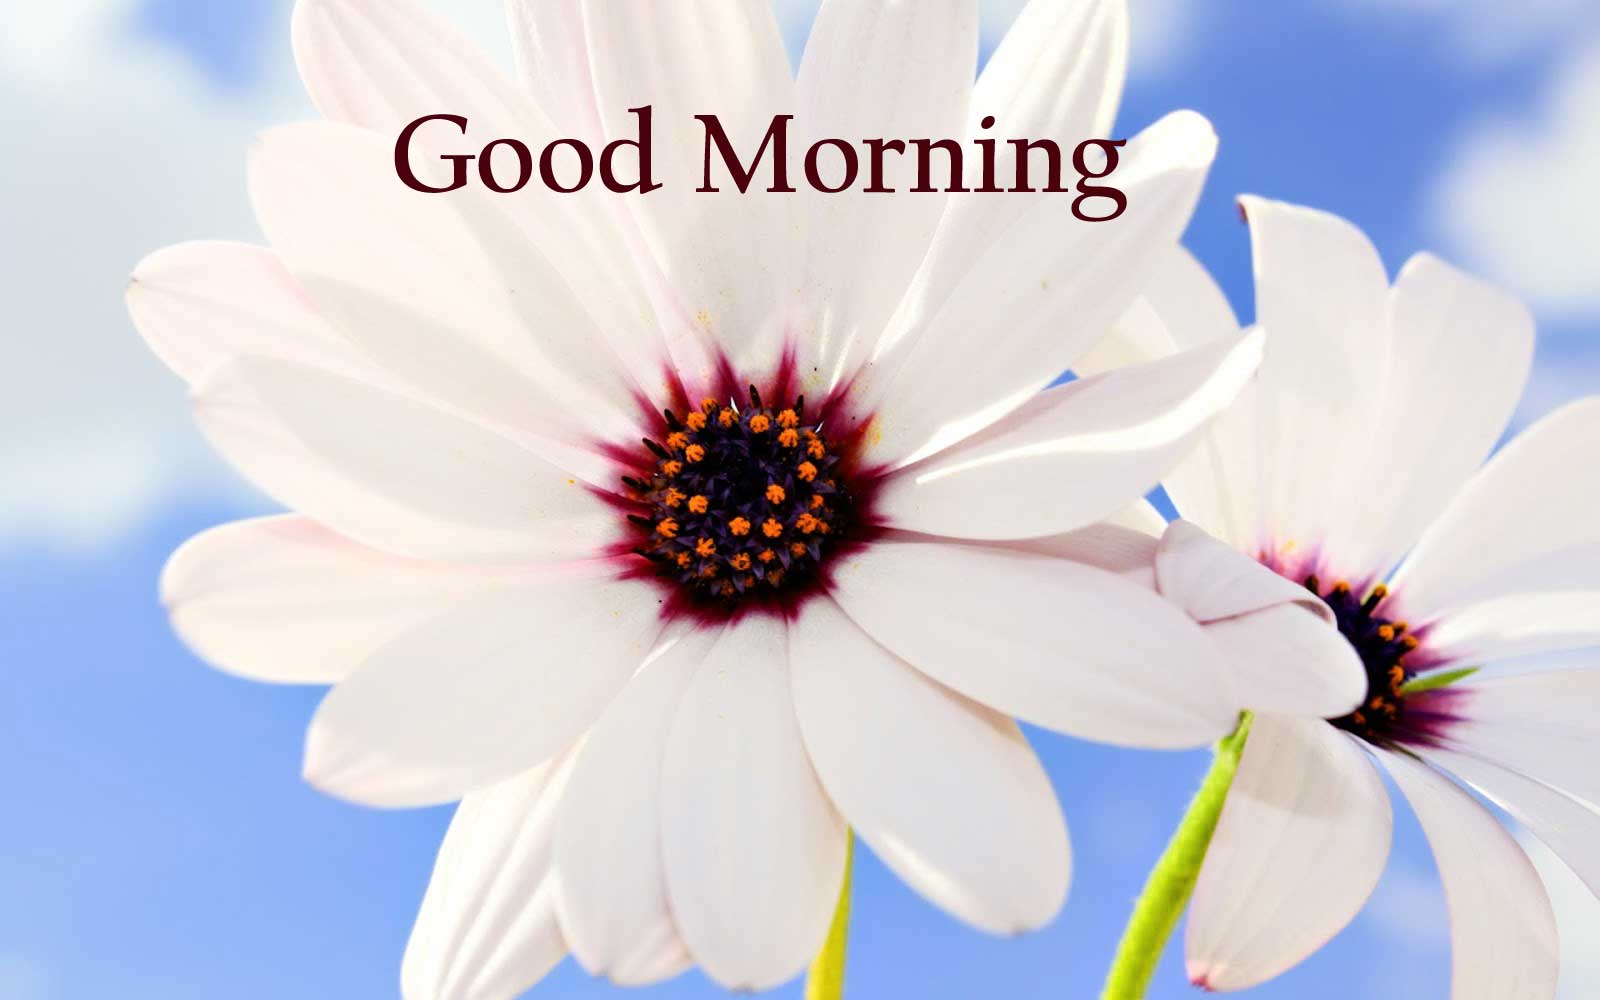 New Beautiful Good Morning Image with Flowers. Top Collection of different types of flowers in the image HD